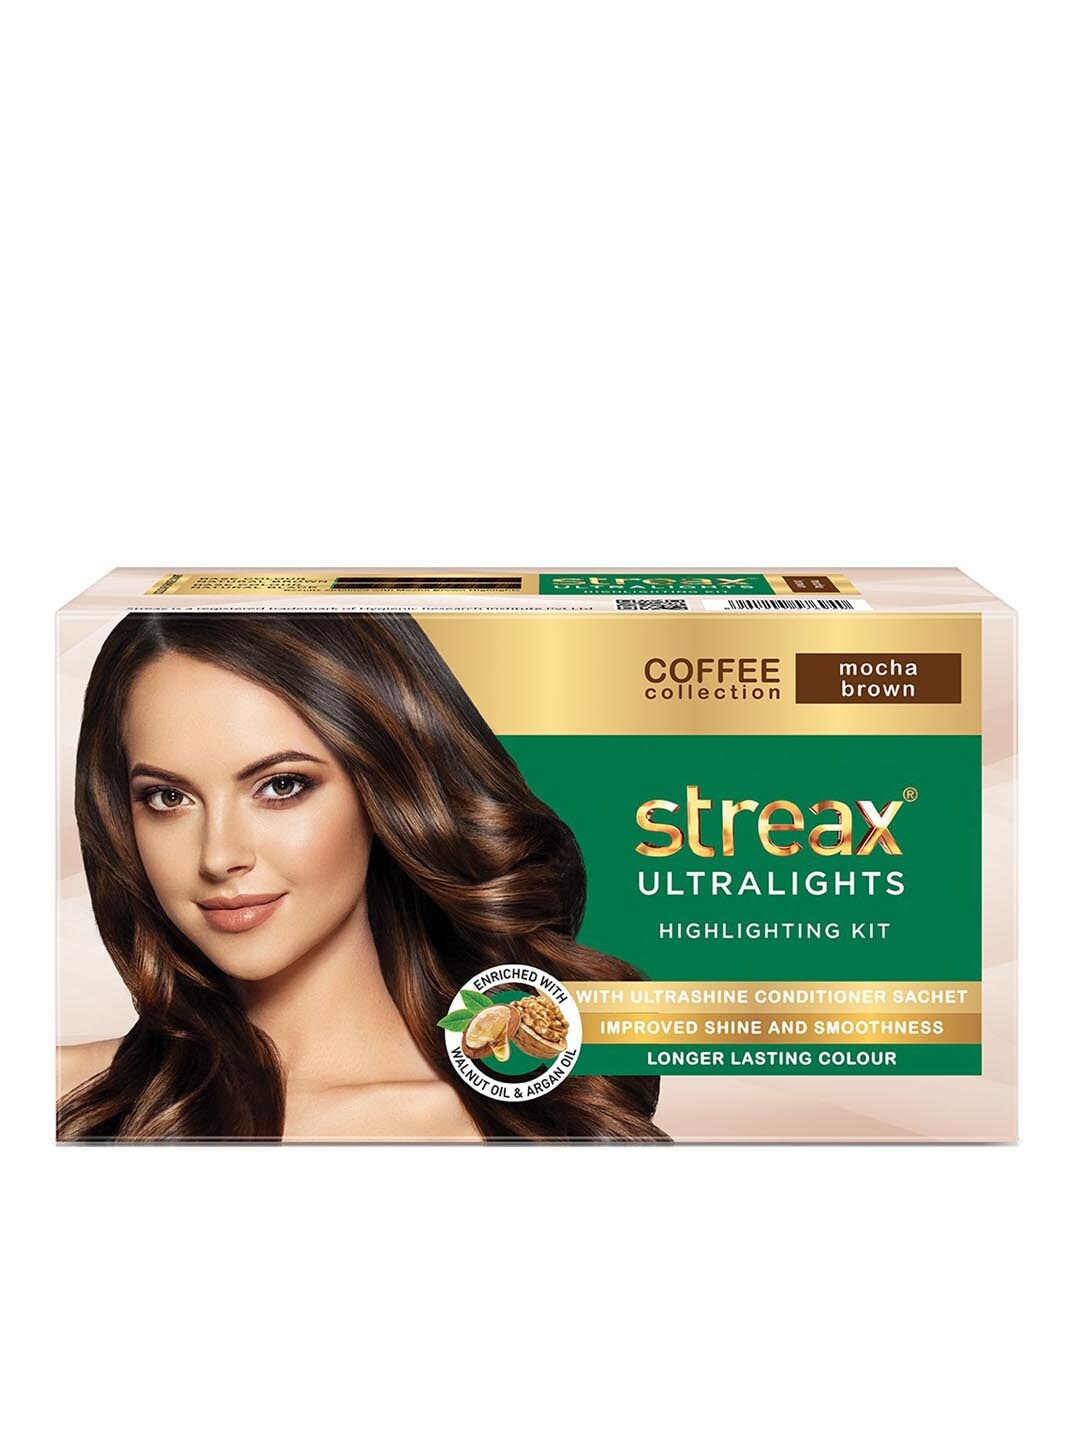 Streax Coffee Collection Ultralights Highlighting Kit - Mocha Brown 50 ml Price in India